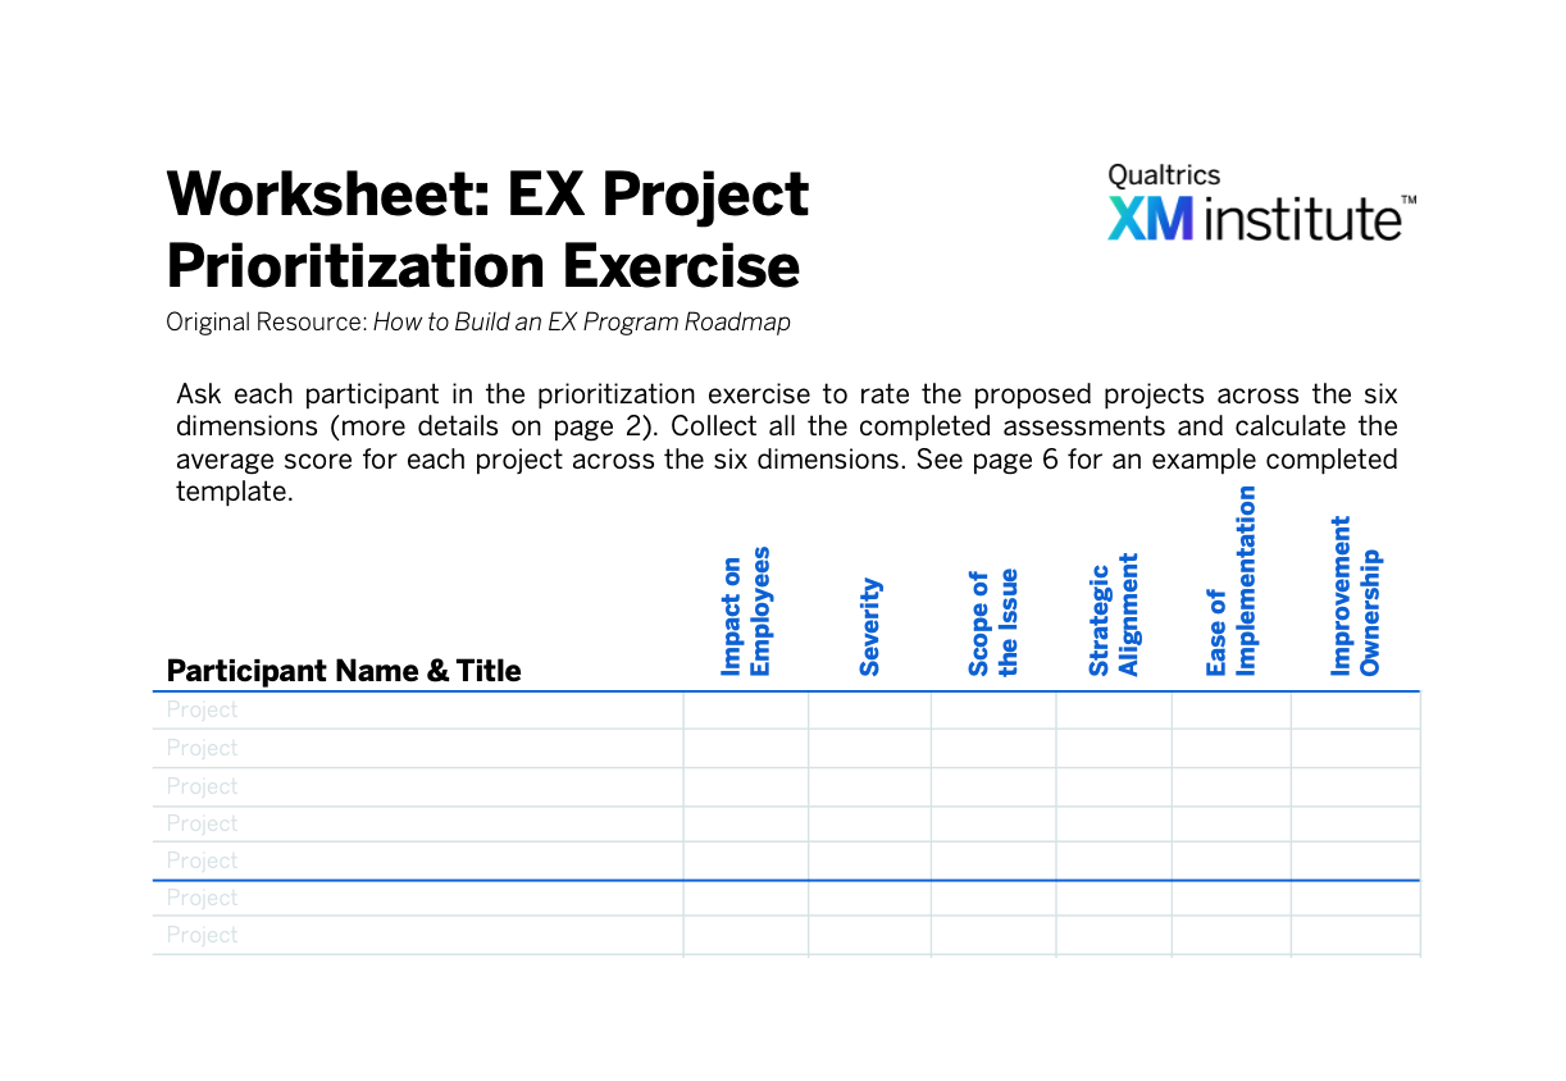 Worksheet: EX Project Prioritization Exercise